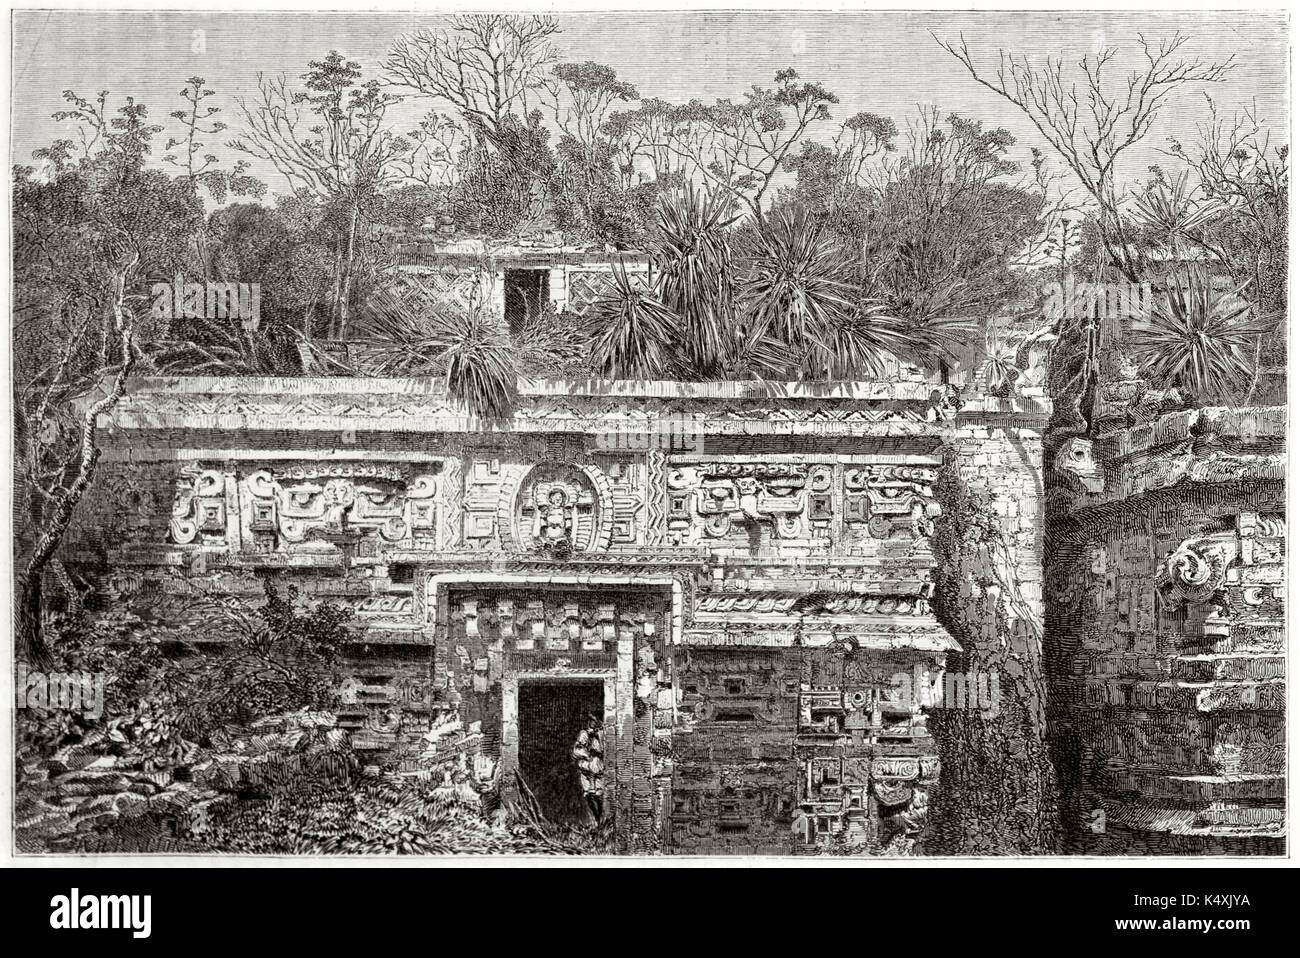 Front view of ruins of an ancient Maya temple emerging from thick vegetation in the jungle. Chiche-Itza Maya archaeological site Yucatan Mexico. By Guaiaud on Le Tour du Monde Paris 1862 Stock Photo